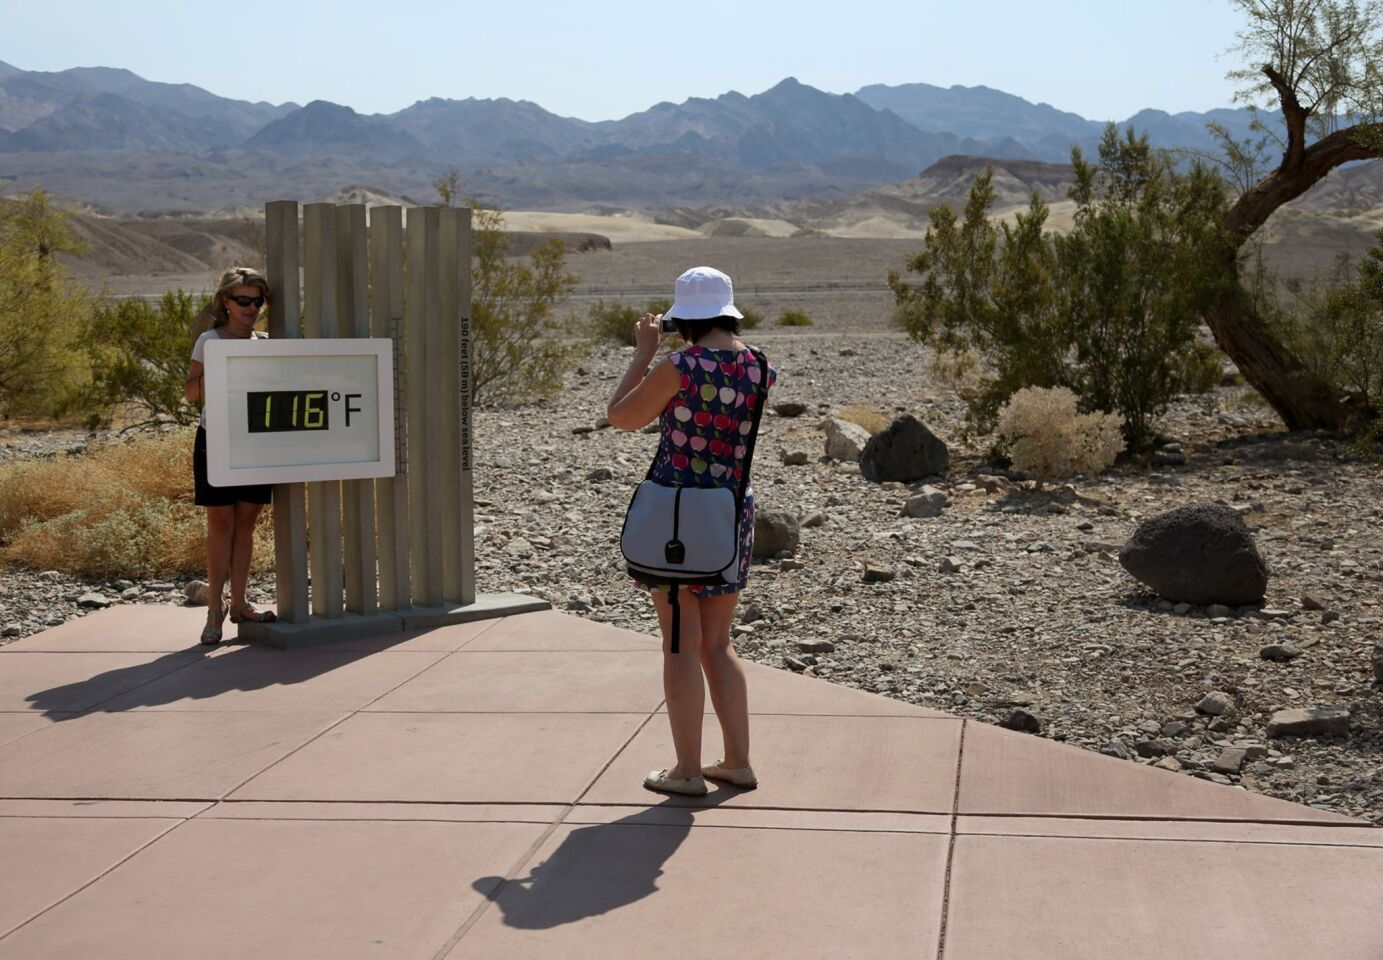 Conchi Almanza takes a photo of Mar Rodriguez in front of a digital thermometer at the Furnace Creek Visitor Center in Death Valley. The two tourists from Spain were likely to experience history Sunday with record temperatures forecast.